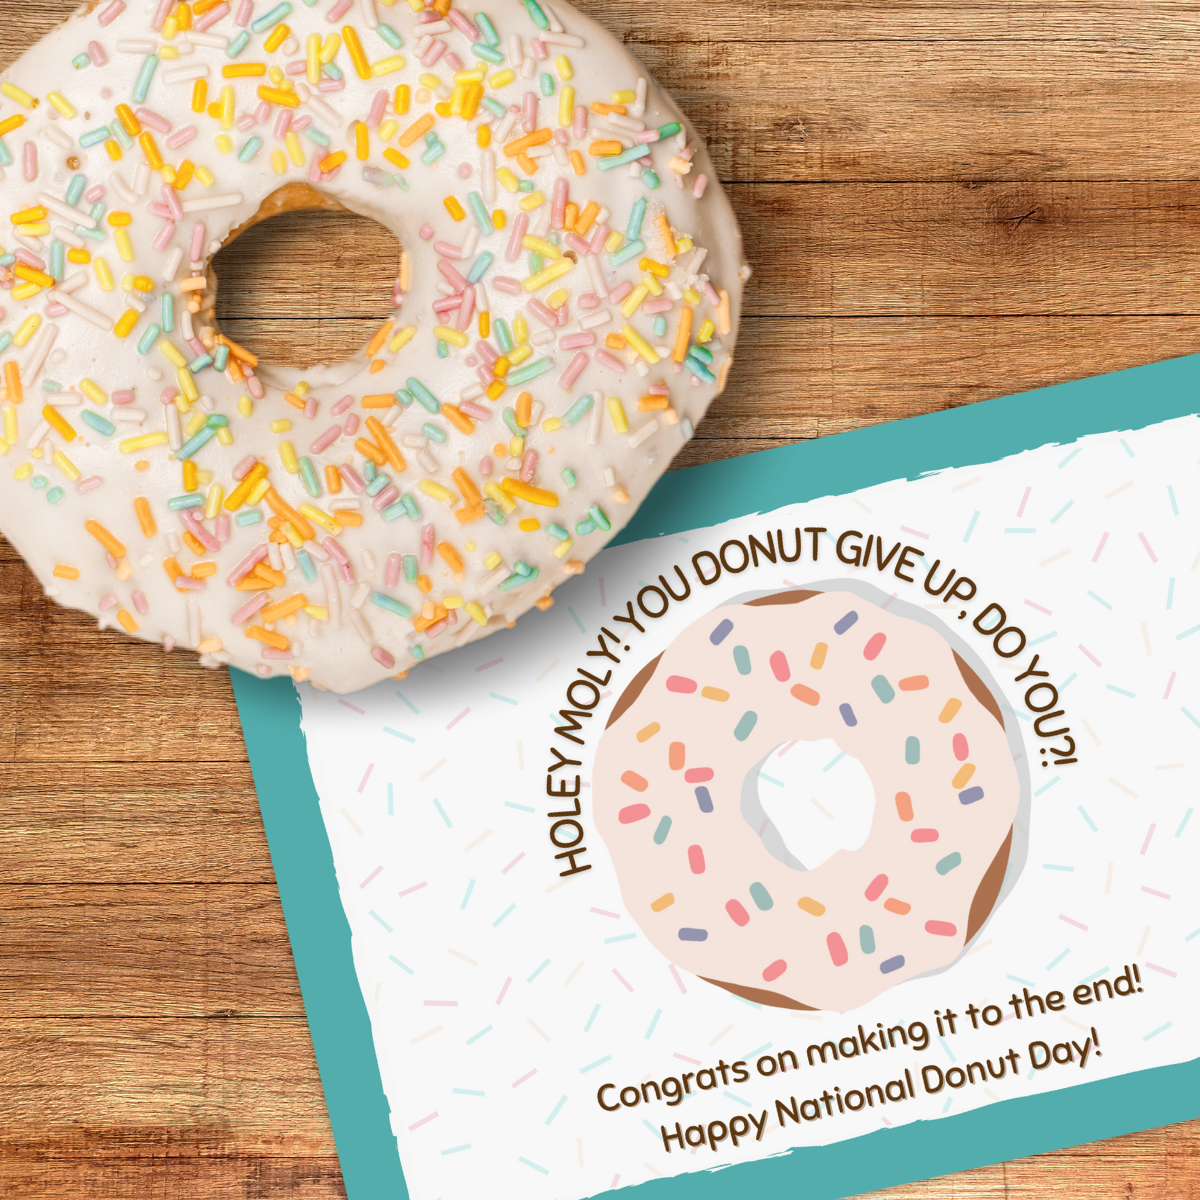 A sprinkle donut sits next to the final card from the National Donut Day treasure hunt.